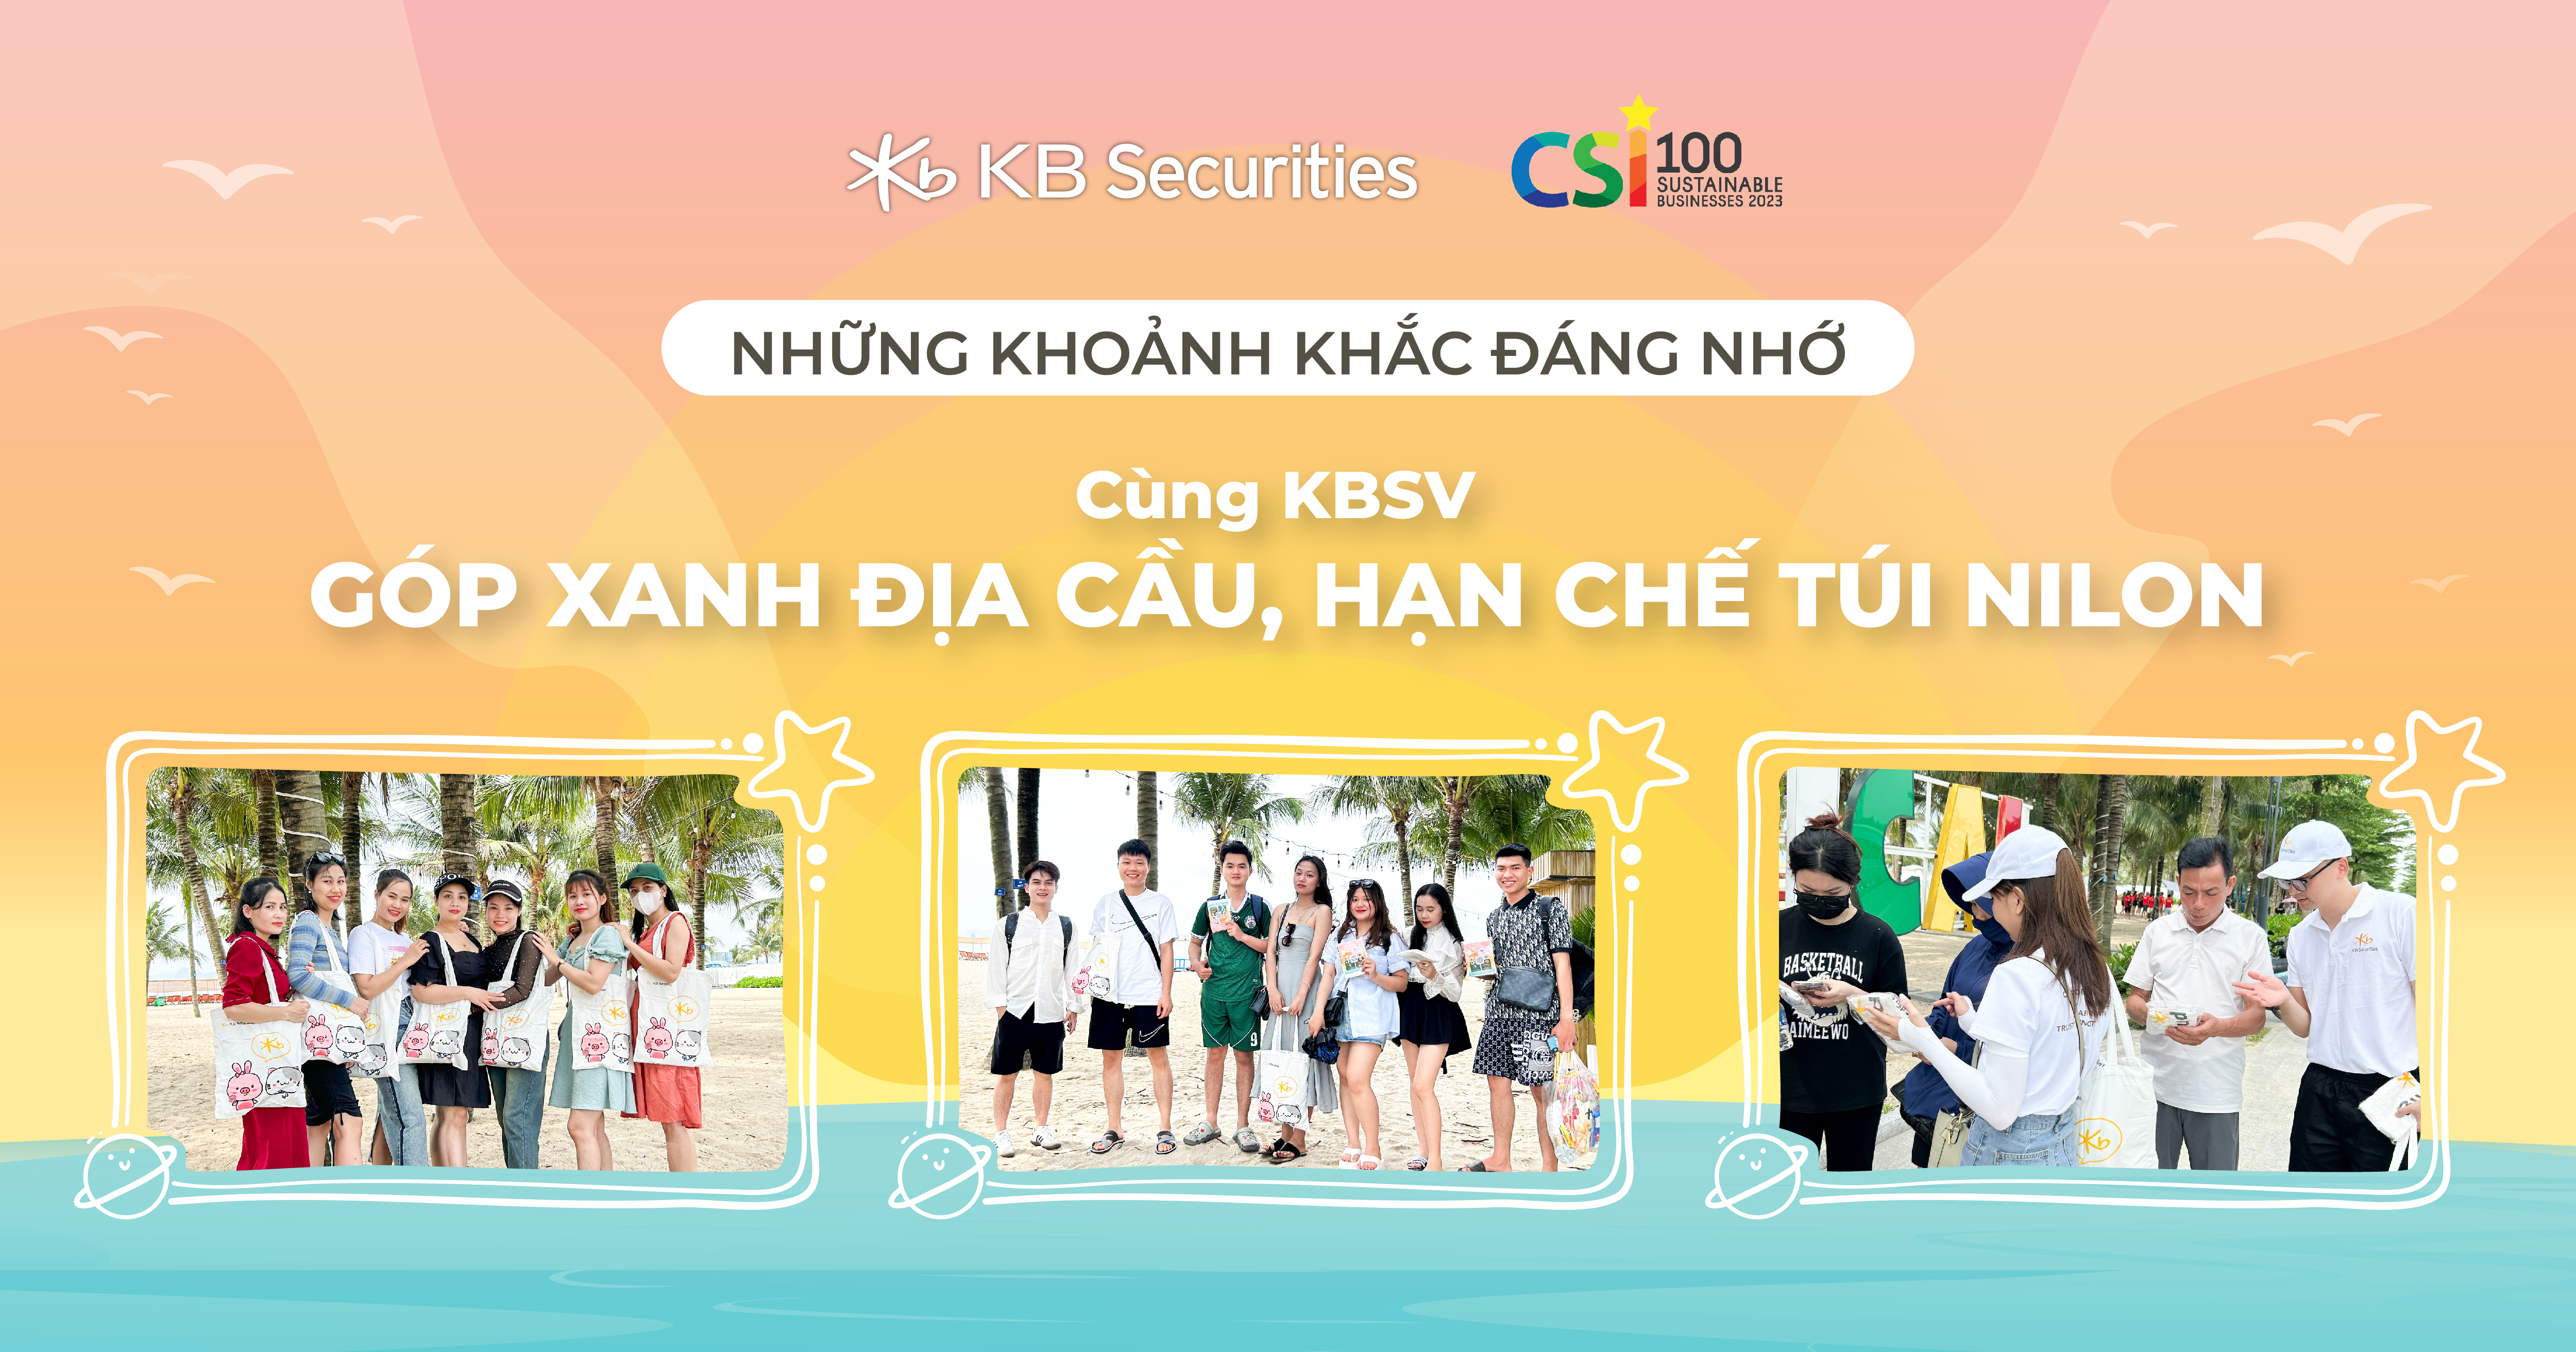 KB Securities Vietnam launch an activity With KBSV, Contributing to a Greener Earth, Reducing Plastic Bags 